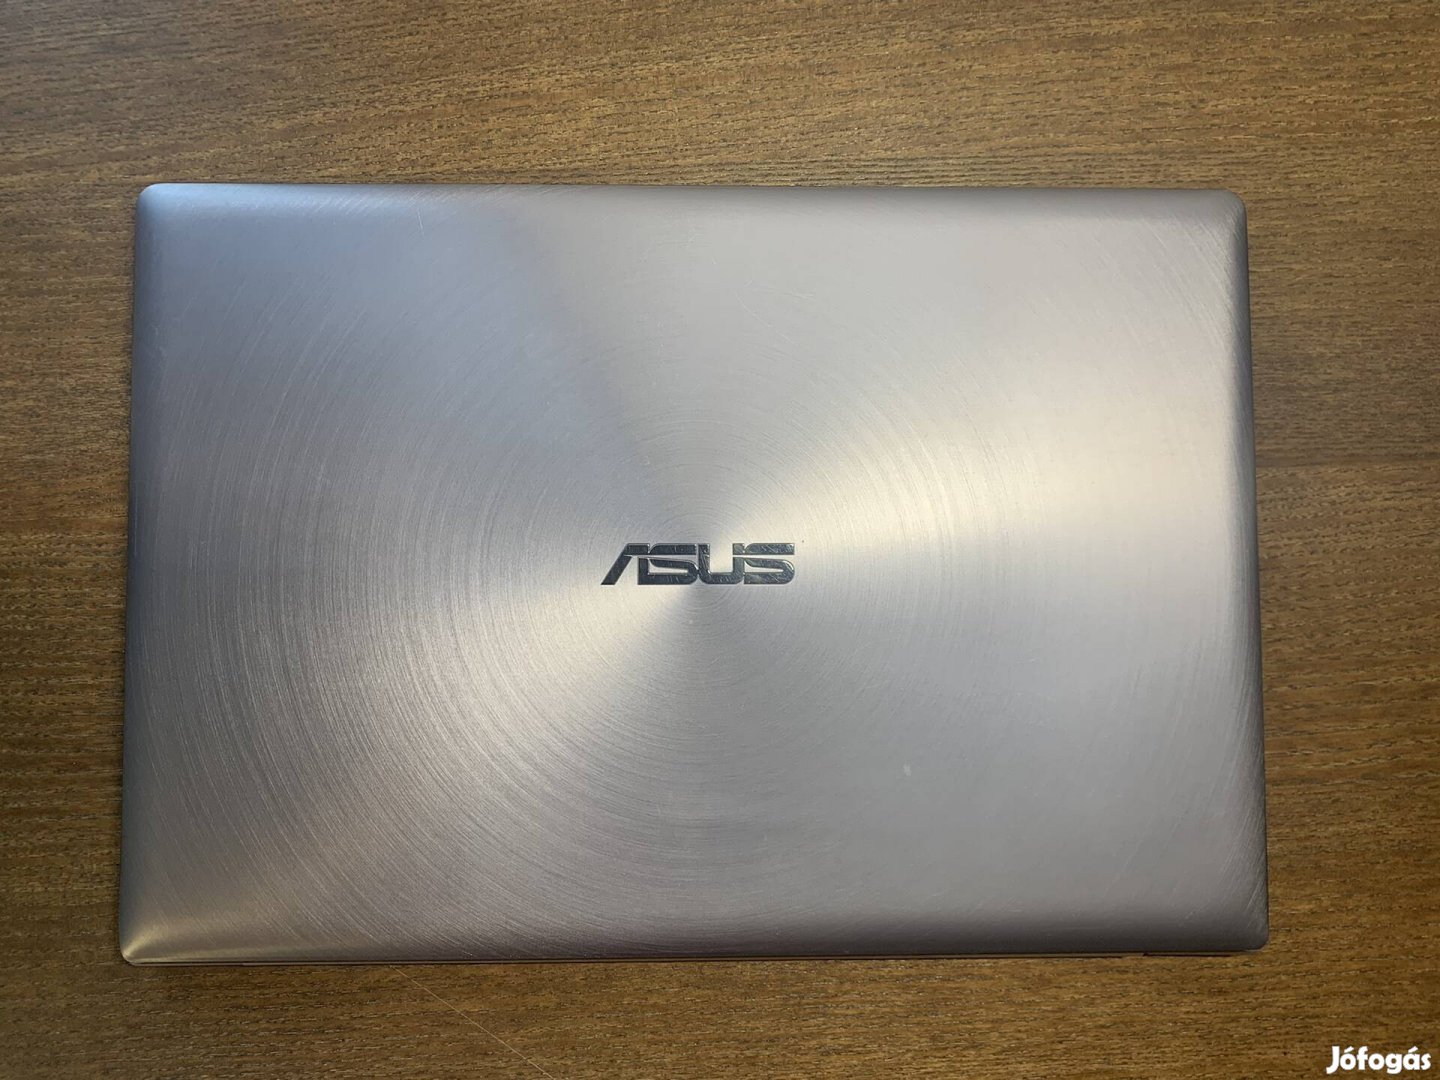 Asus UX303L Notebook pc